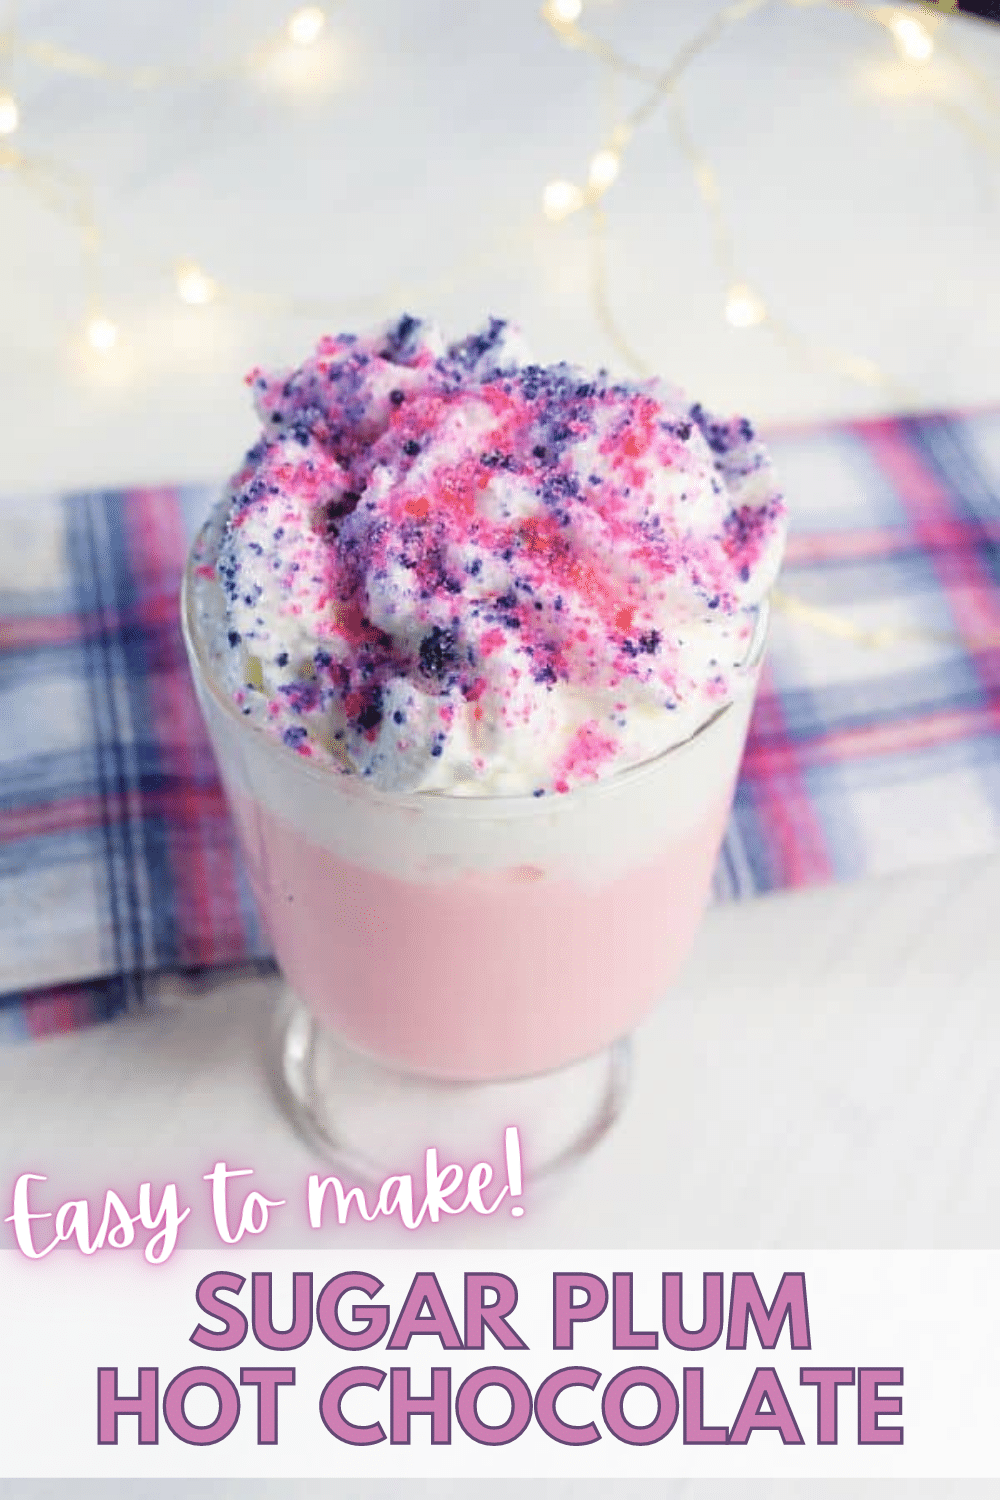 This colorful, flavorful Sugar Plum Hot Chocolate is a wonderful winter treat for both kids and adults. Make up a batch to sip while watching the Nutcracker or simply to warm up after a fun day playing in the snow! #hotchocolate #sugarplumfairy #funfood via @wondermomwannab